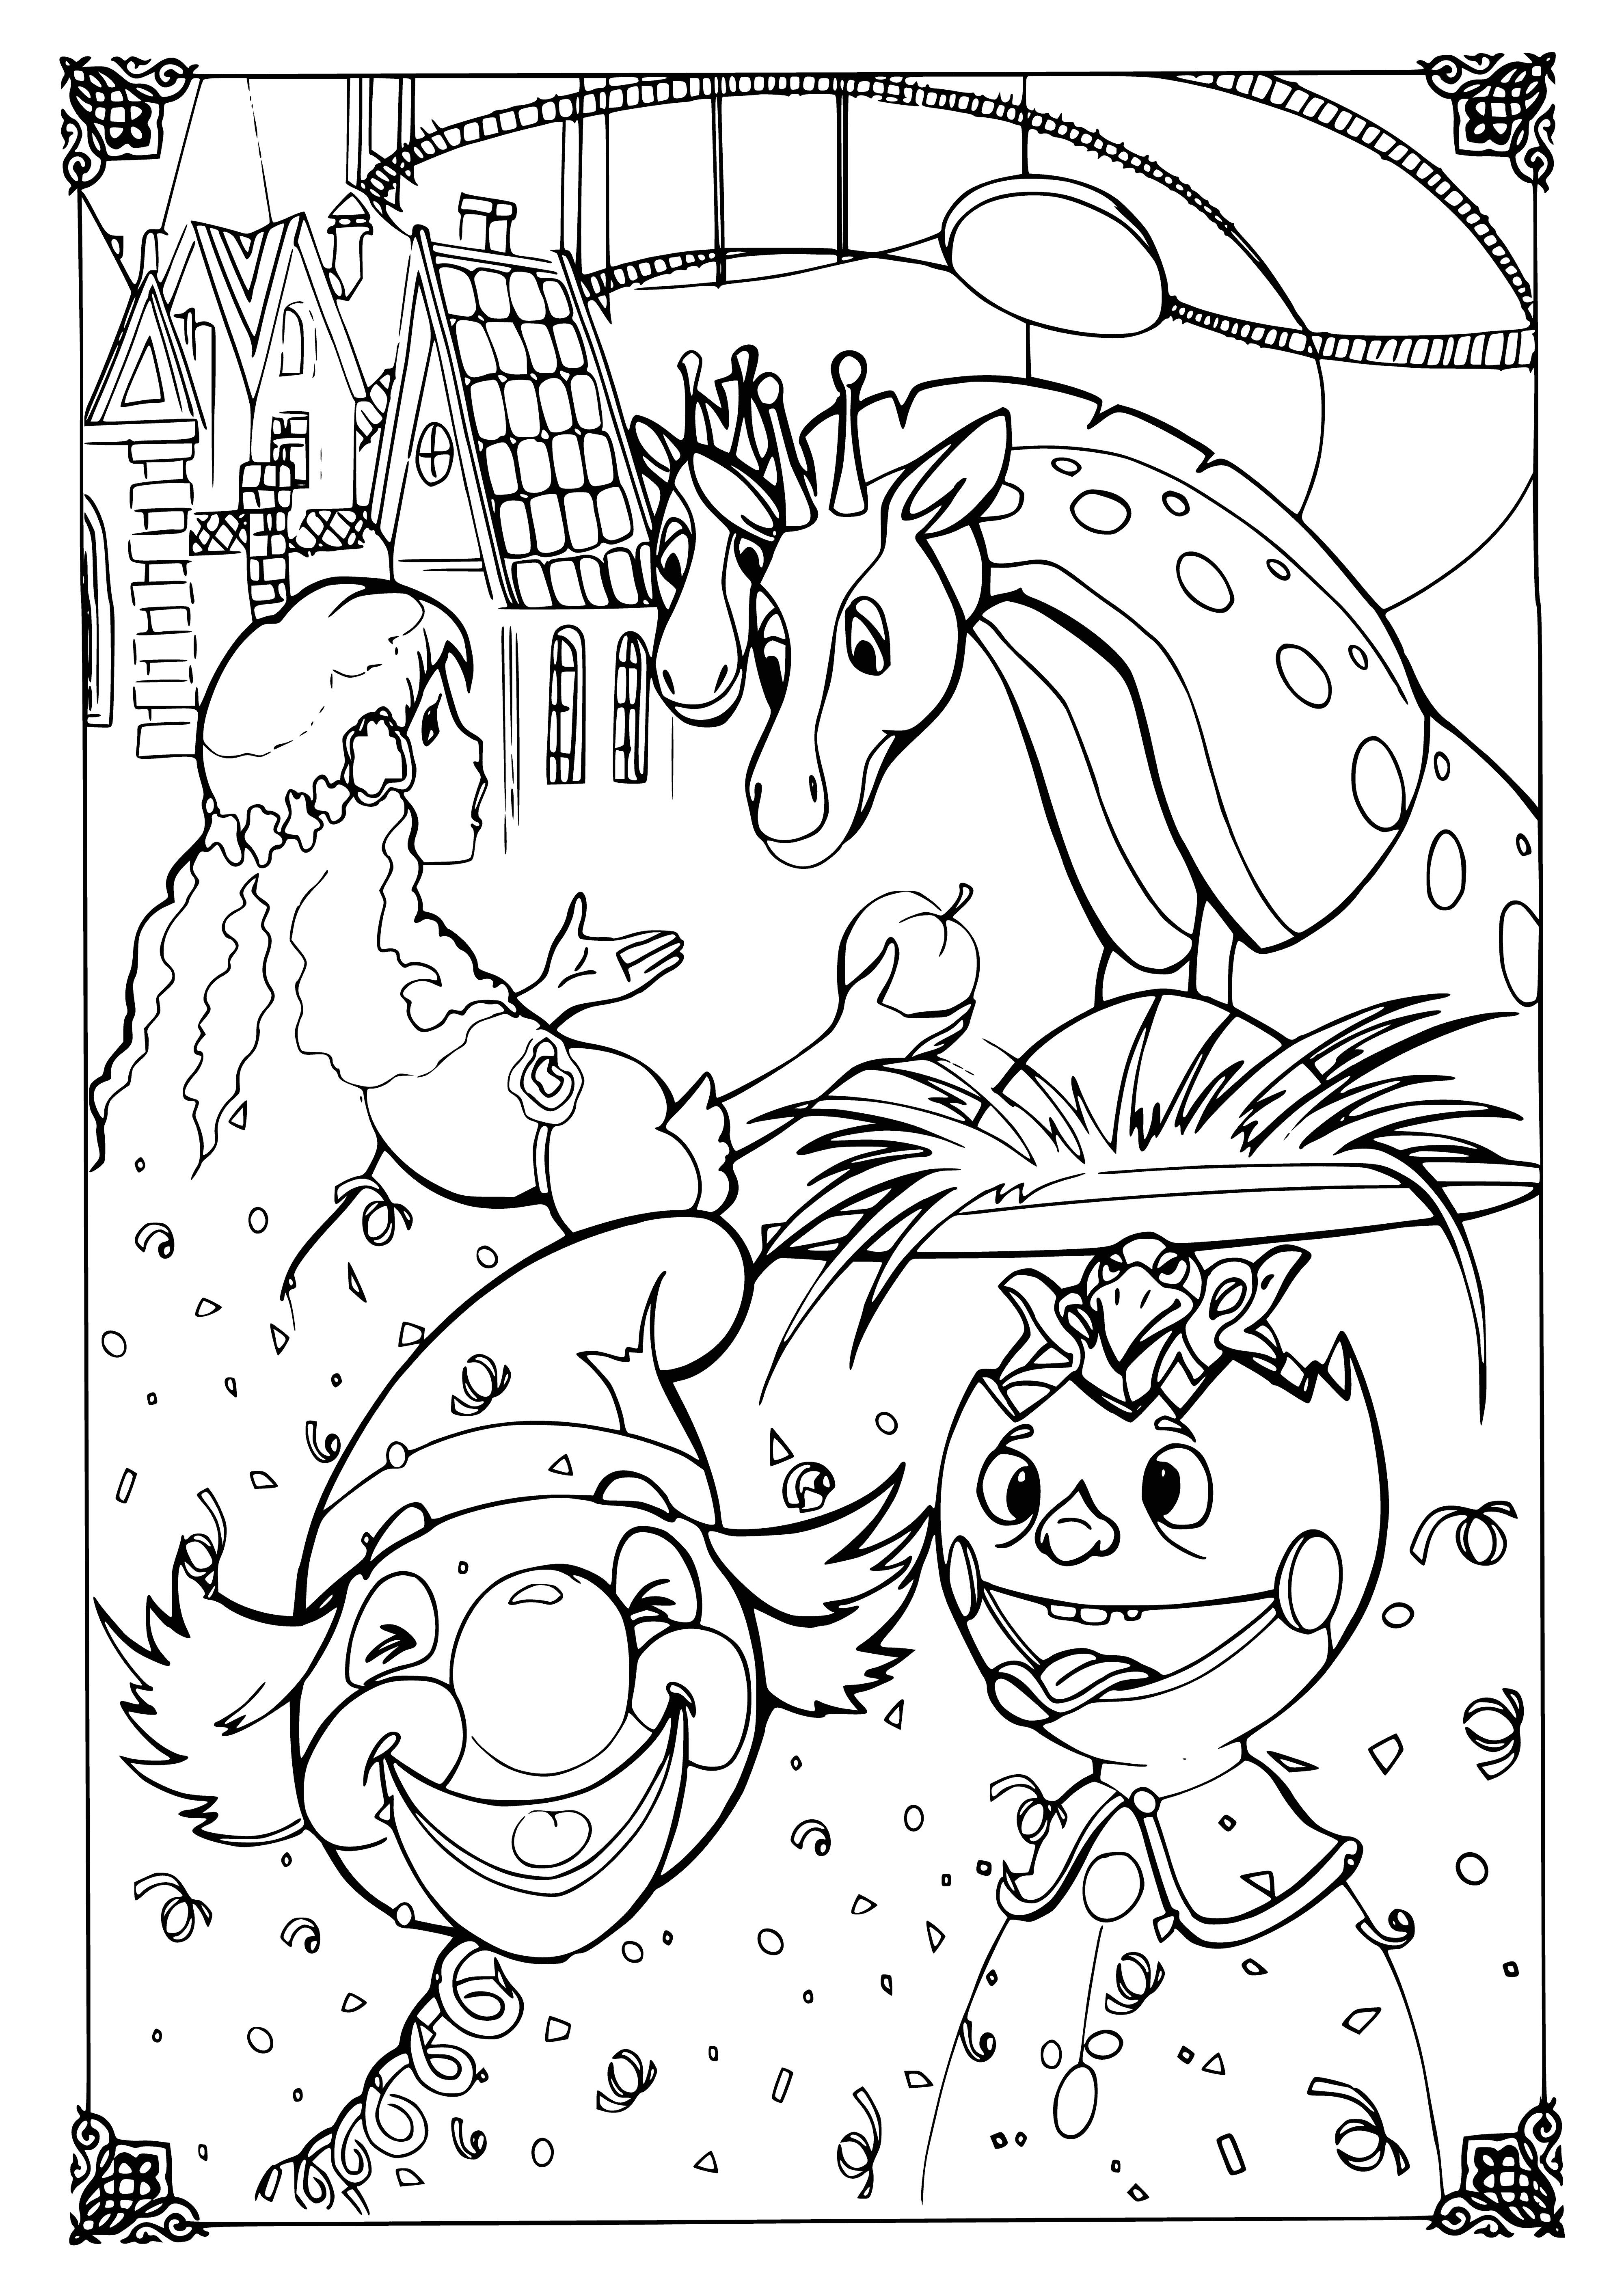 coloring page: Masha is transported to a magical land where she meets a nutcracker who helps her find her way back home. They learn lessons about working together & being brave while making new friends.